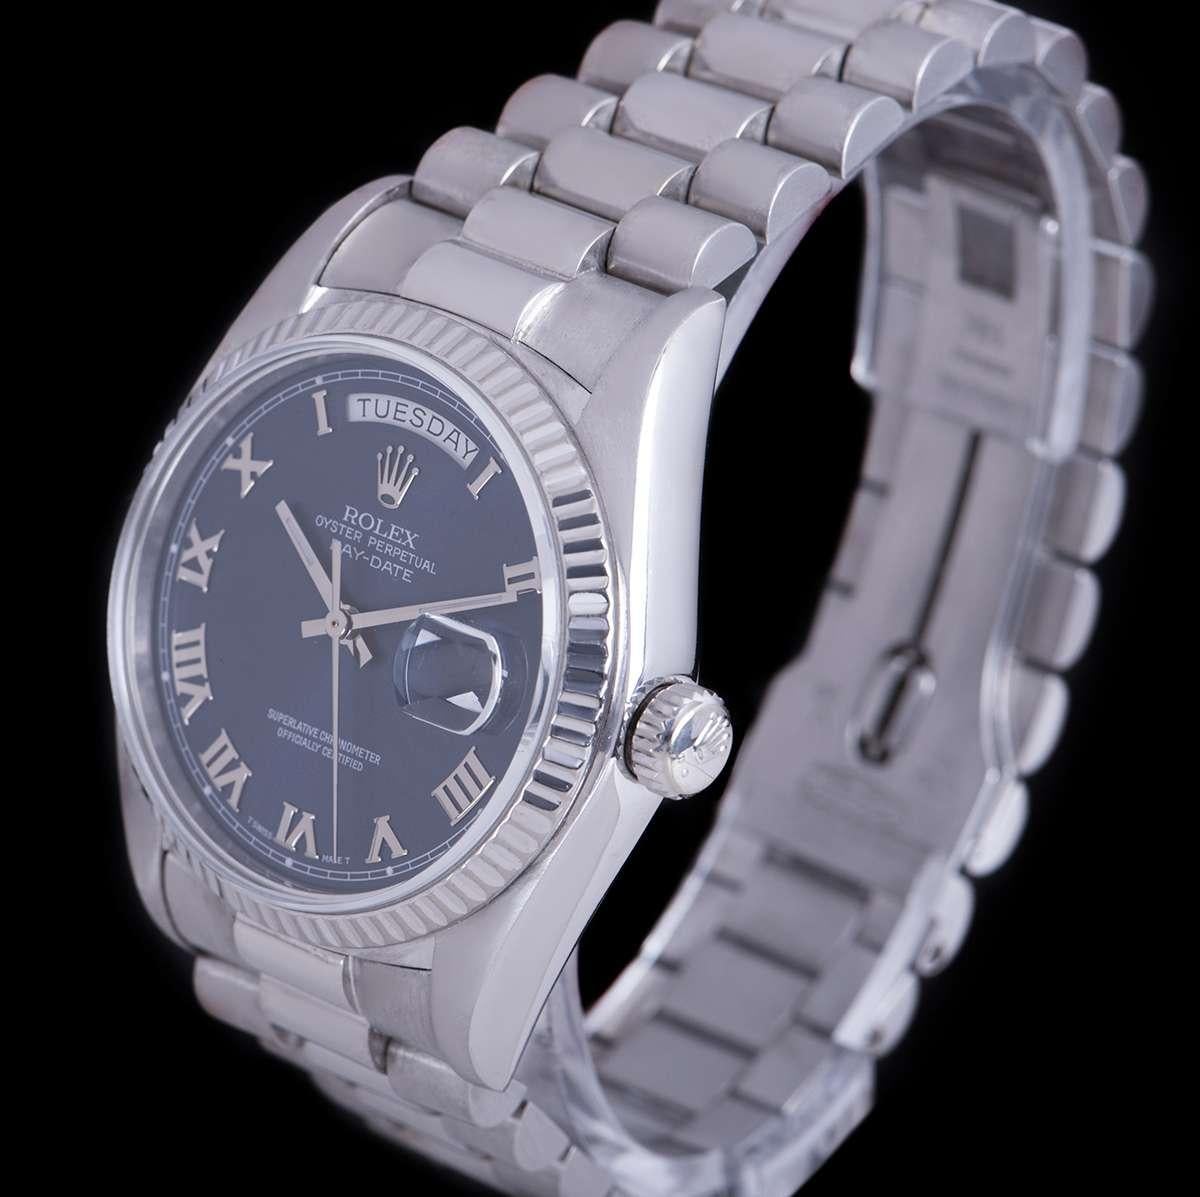 An 18k White Gold Oyster Perpetual Day-Date Gents Wristwatch from 1979, blue dial with applied roman numerals, day aperture at 12 0'clock, date aperture at 3 0'clock, a fixed 18k white gold fluted bezel, an 18k white gold president bracelet with a